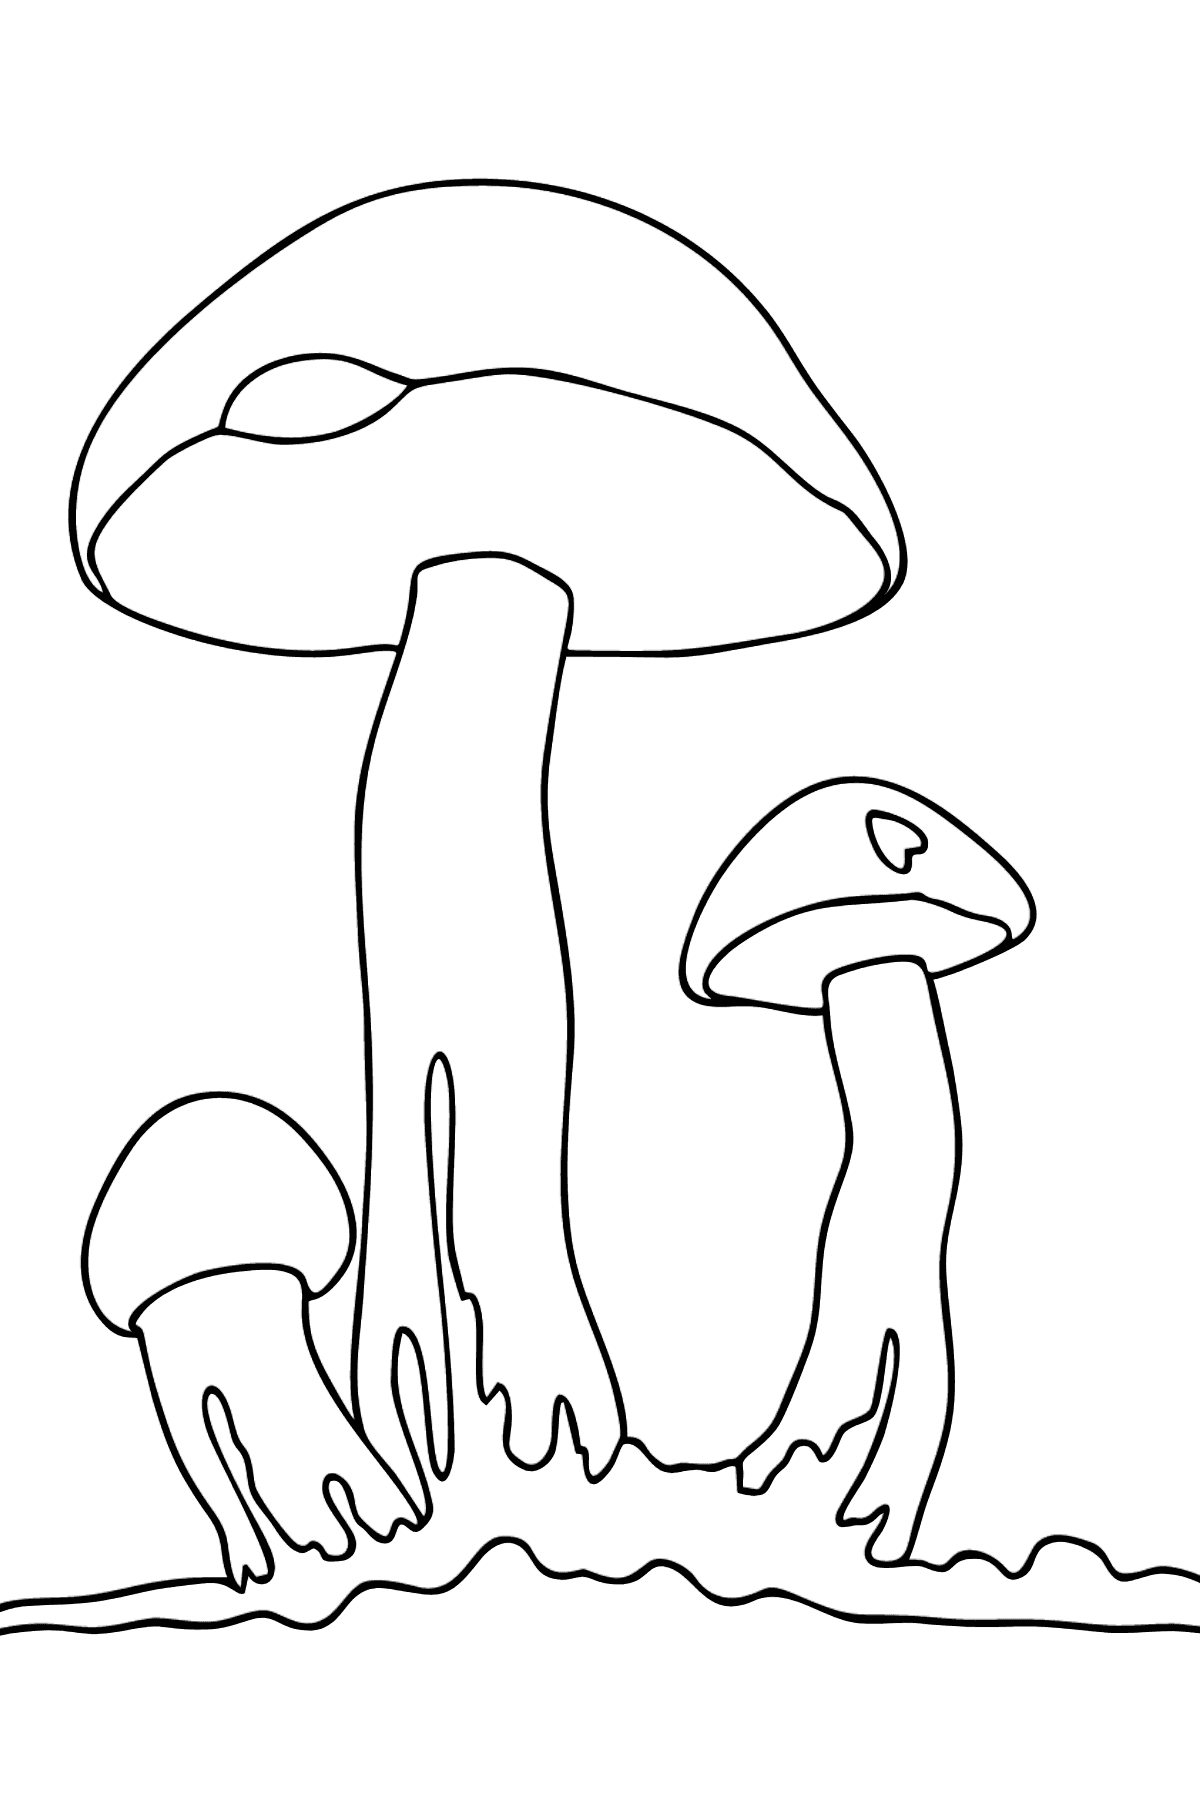 Rough boletus coloring page - Coloring Pages for Kids